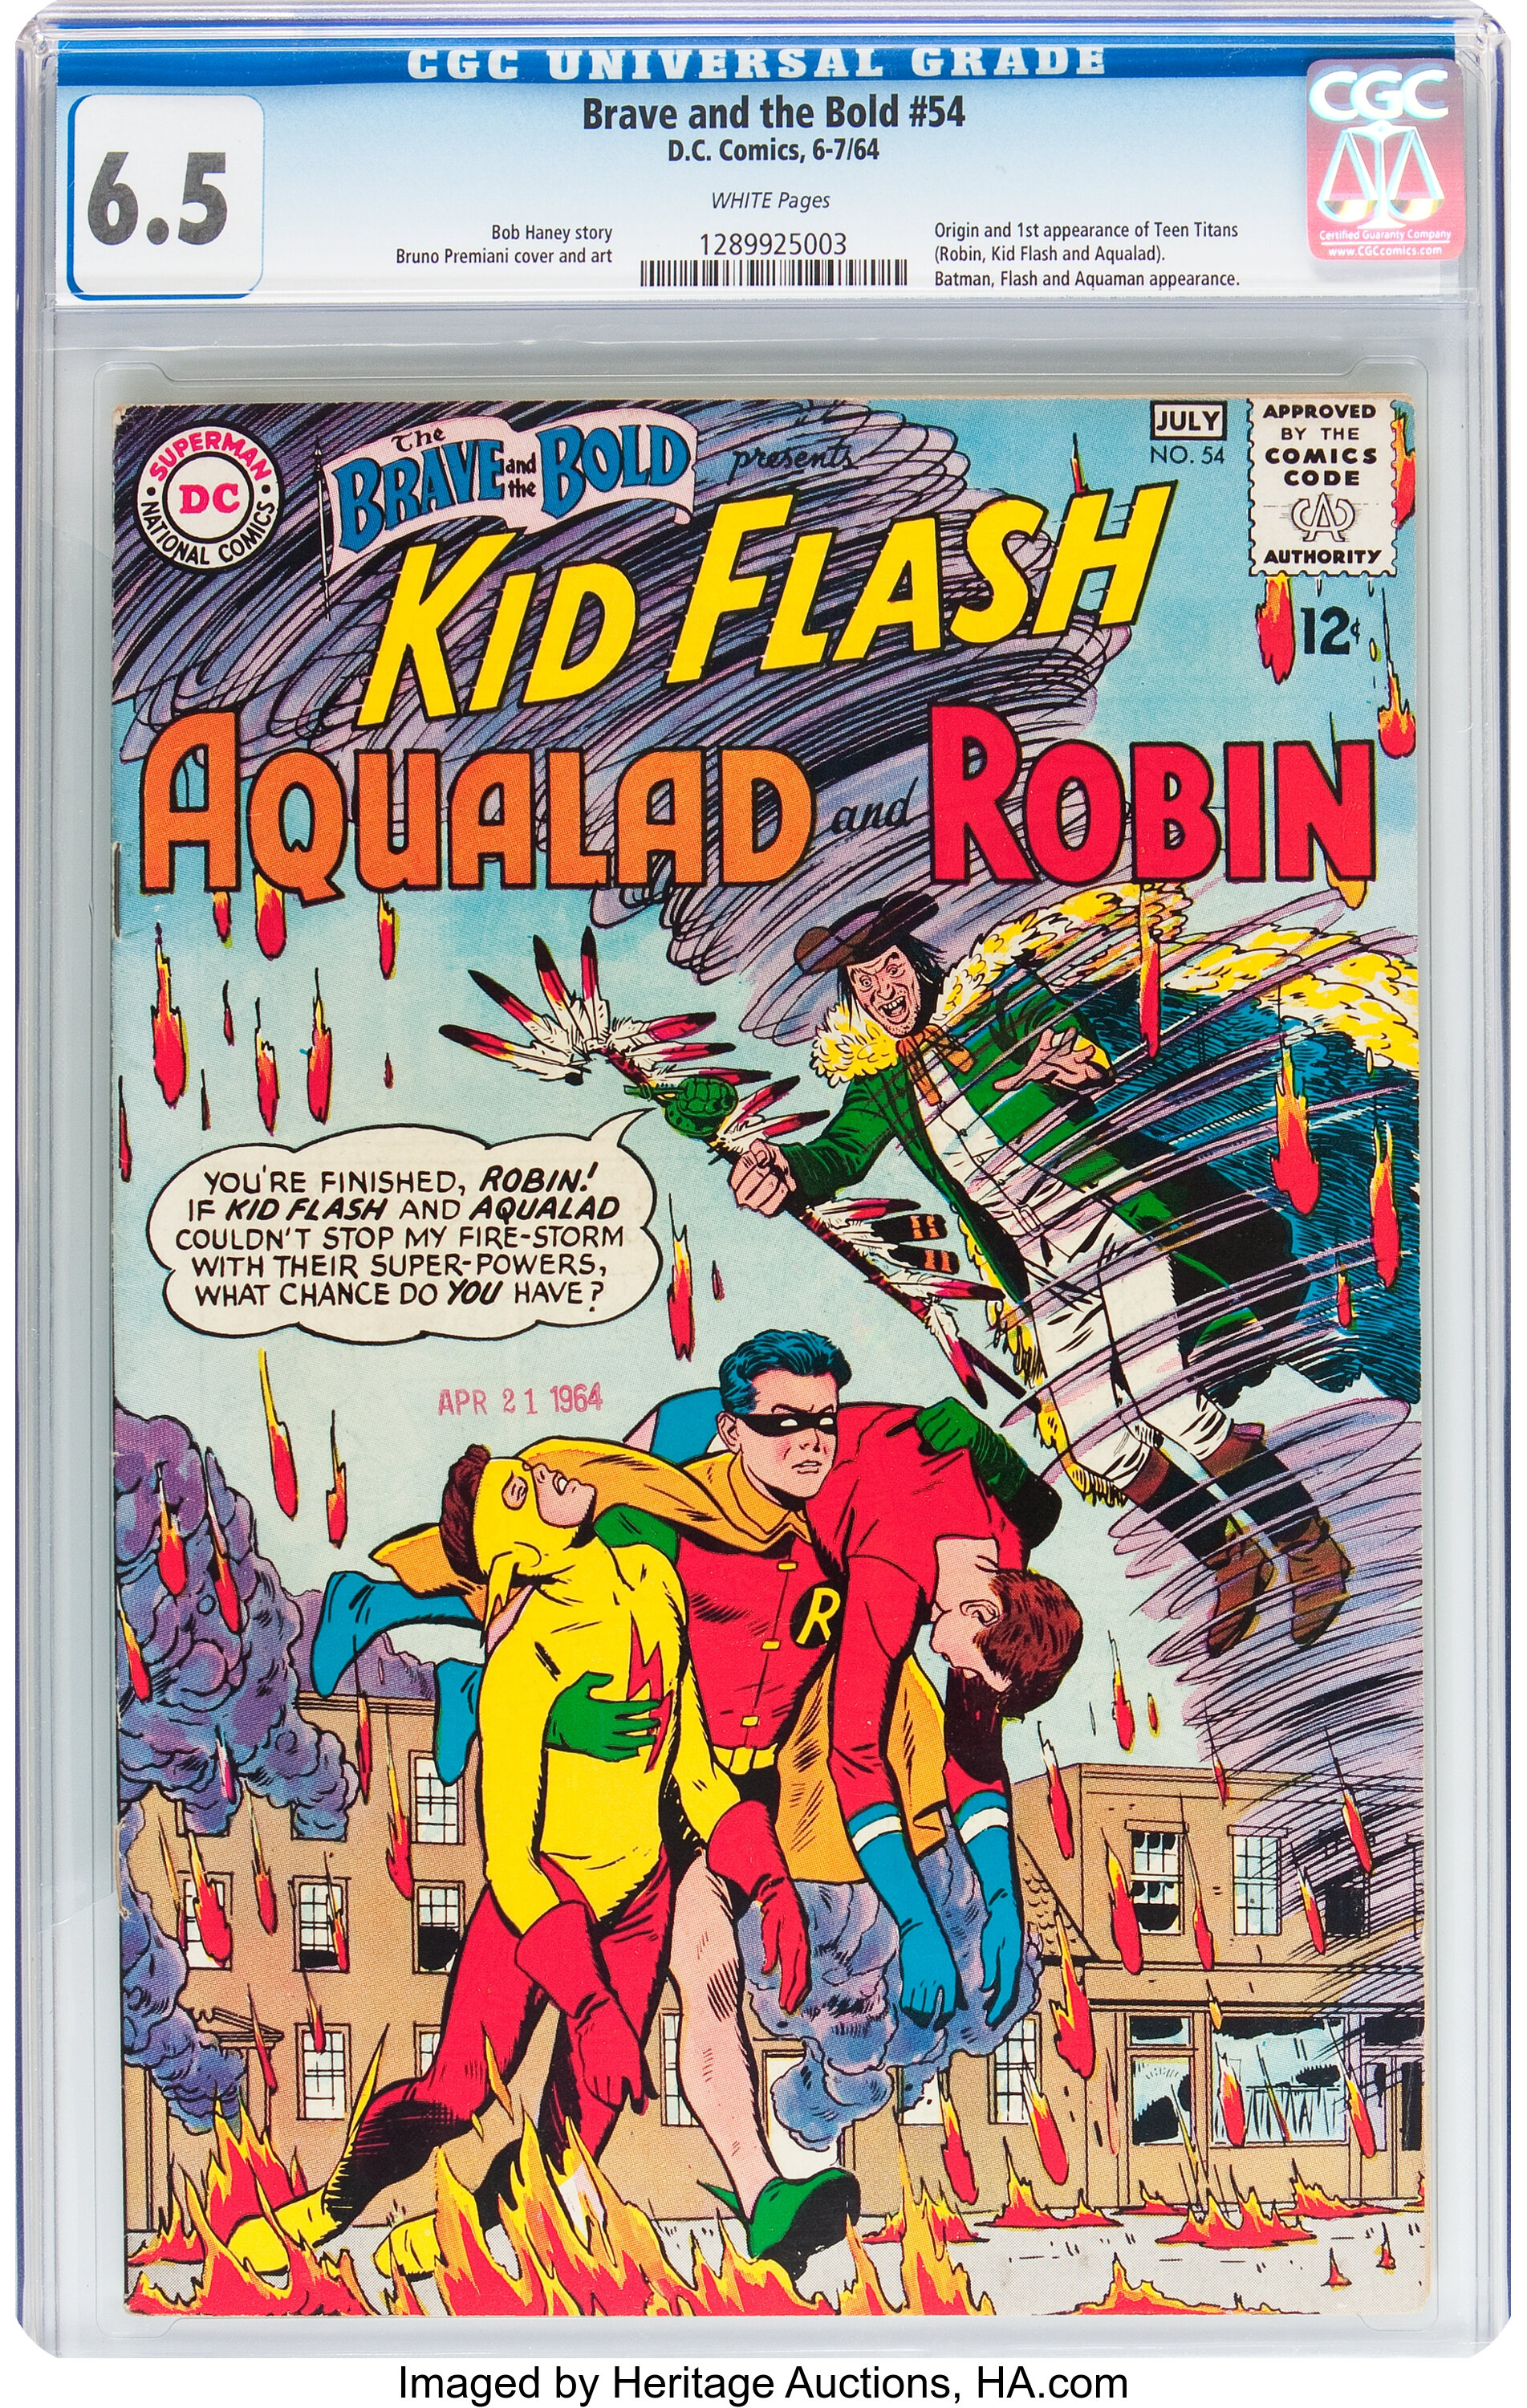 The Brave and the Bold #54 Kid Flash, Aqualad, and Robin (DC, 1964